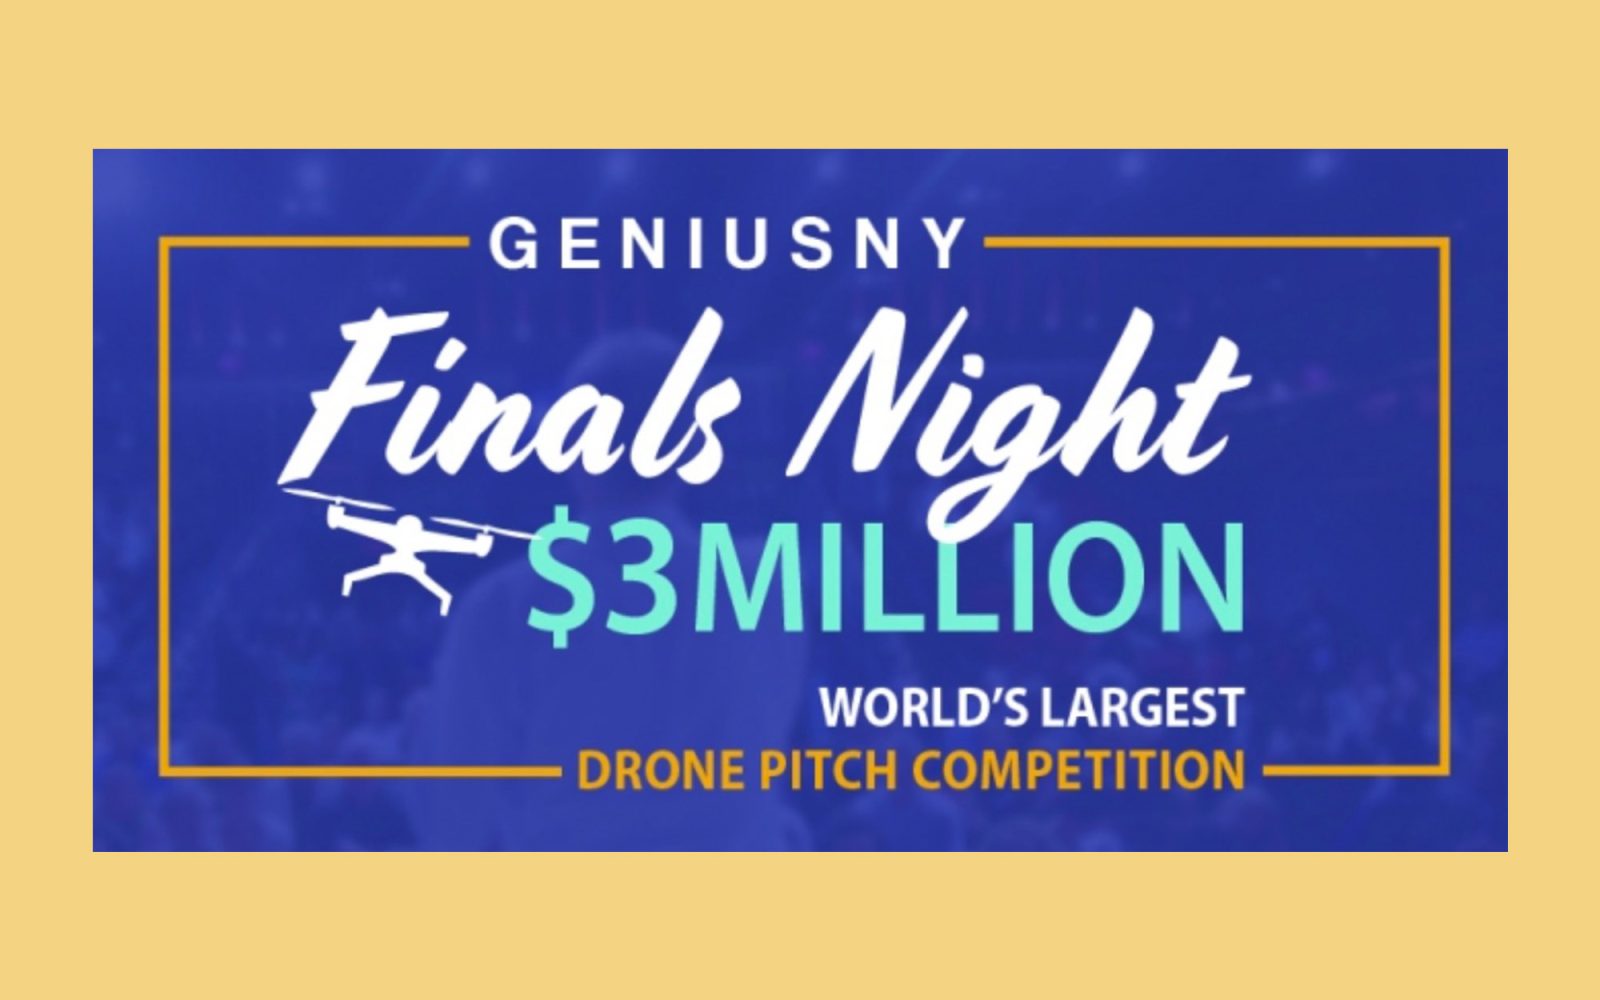 The world's largest drone pitch competition